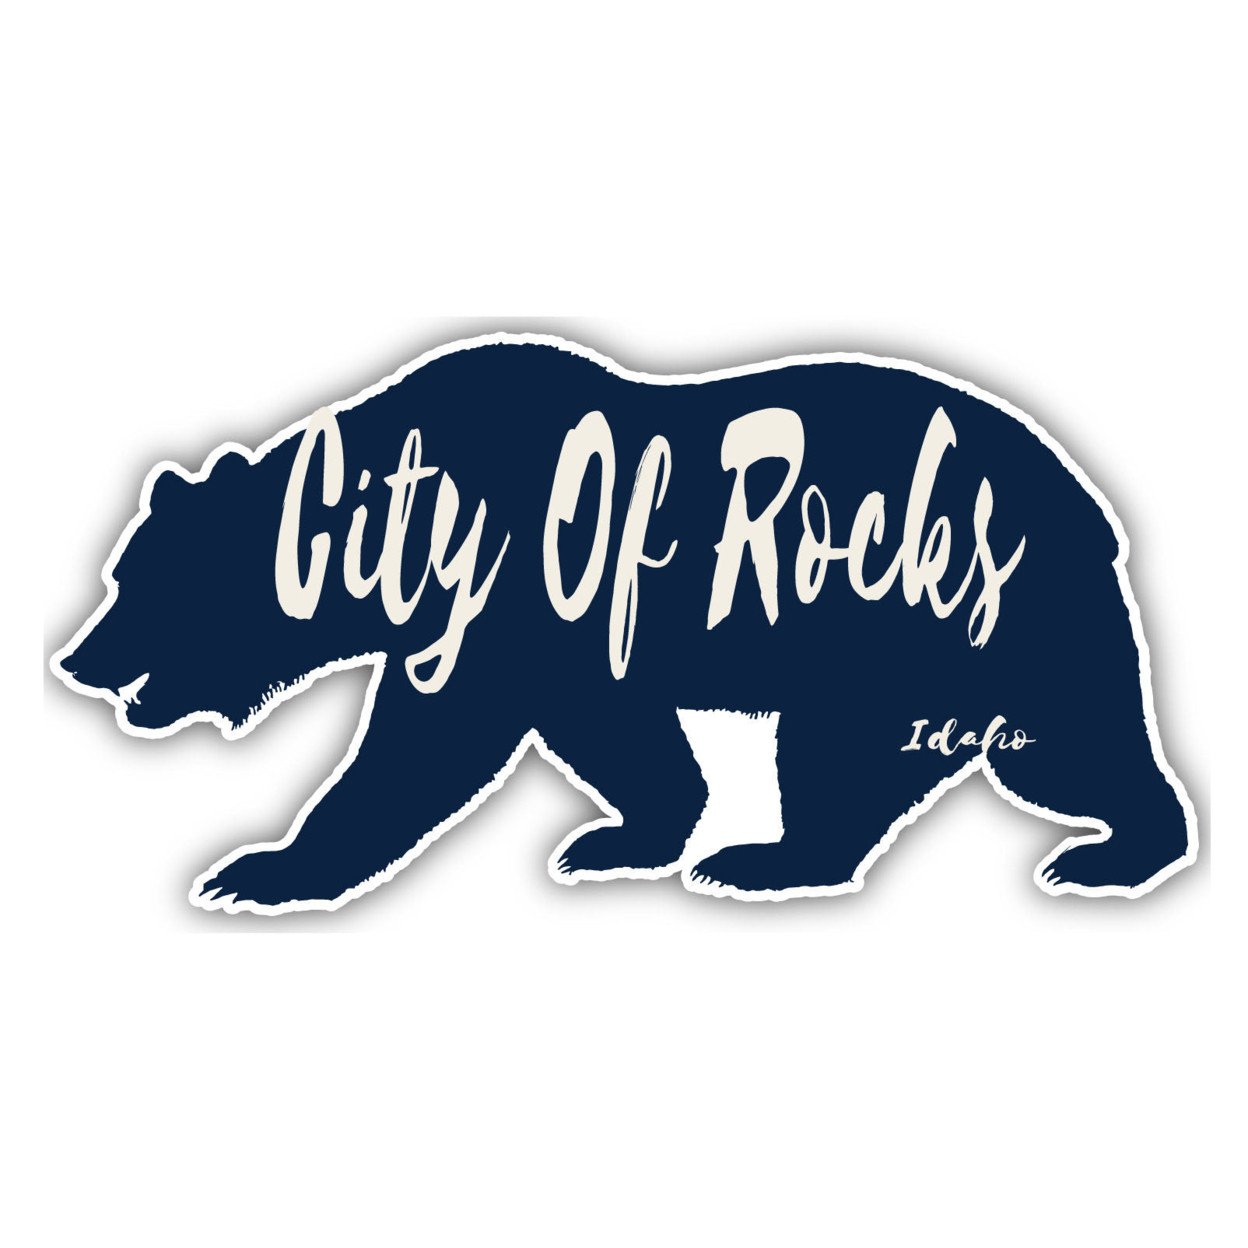 City Of Rocks Idaho Souvenir Decorative Stickers (Choose Theme And Size) - 4-Pack, 10-Inch, Bear